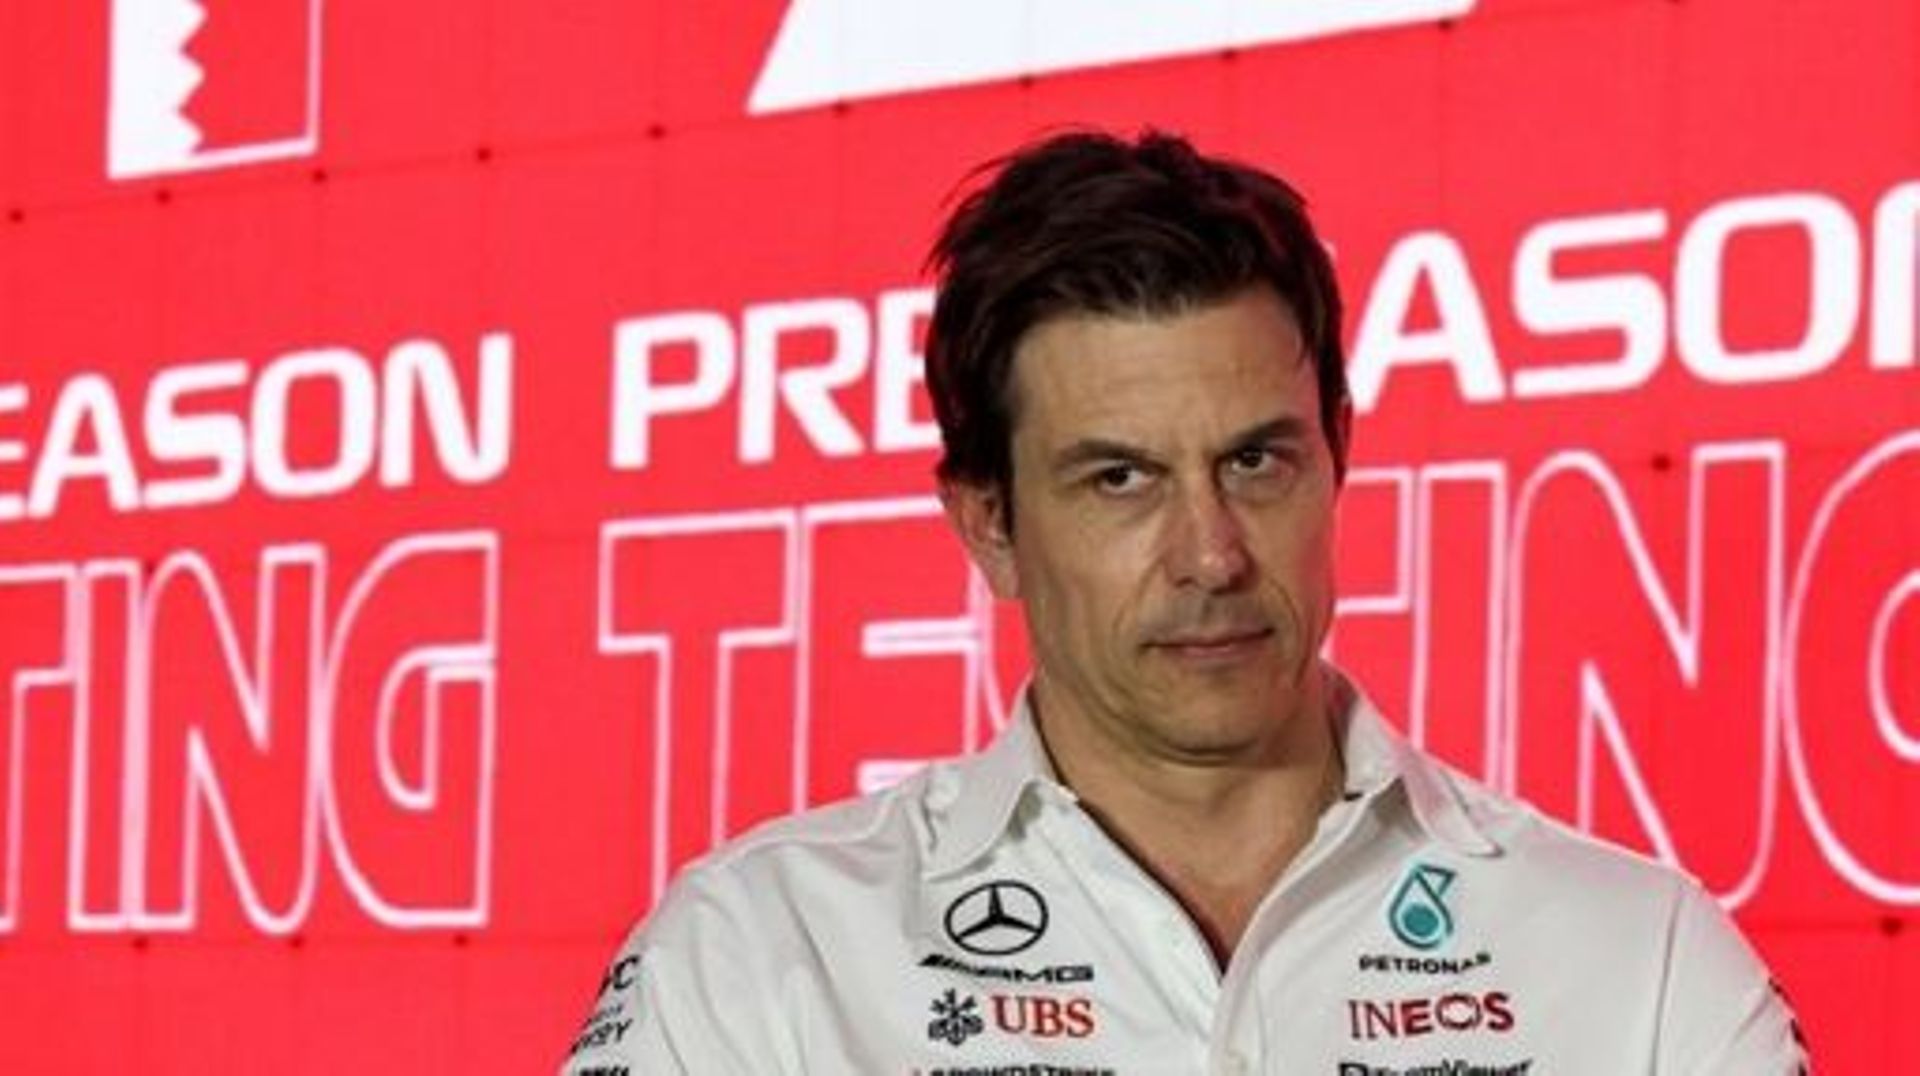 Mercedes' Austrian team principal Toto Wolff attends a press conference on the first day of Formula One pre-season testing at the Bahrain International Circuit in Sakhir on February 23, 2023. Giuseppe CACACE / AFP